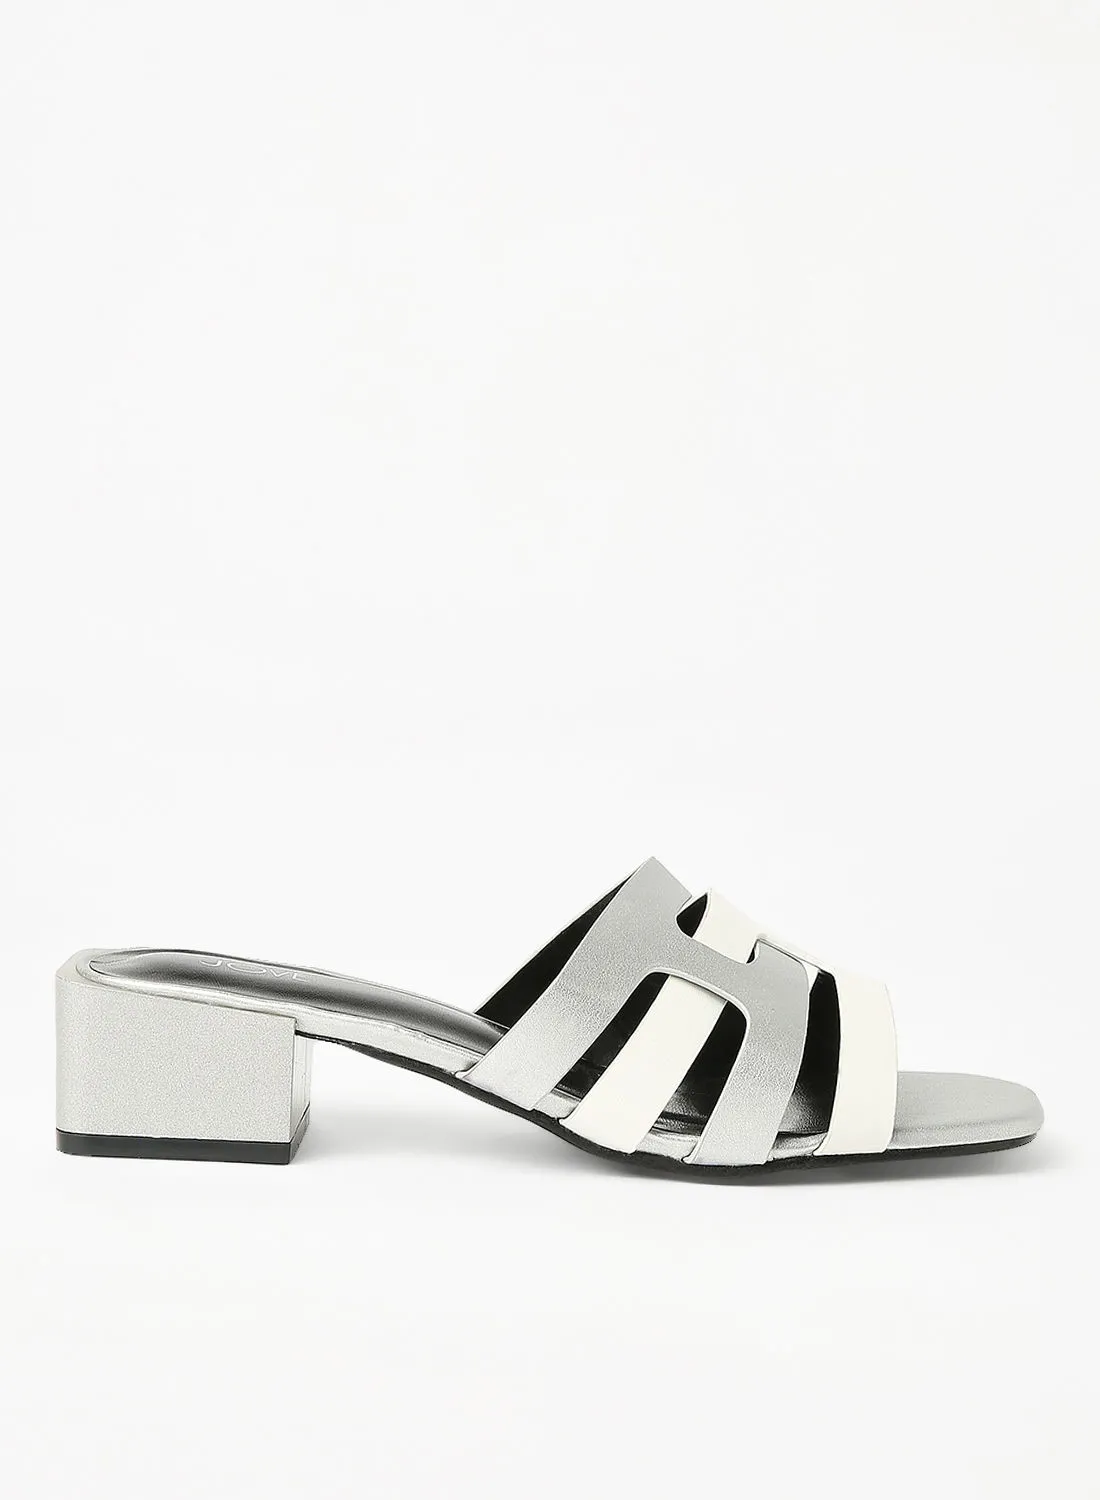 Jove Fashionable Heeled Sandals Silver/White